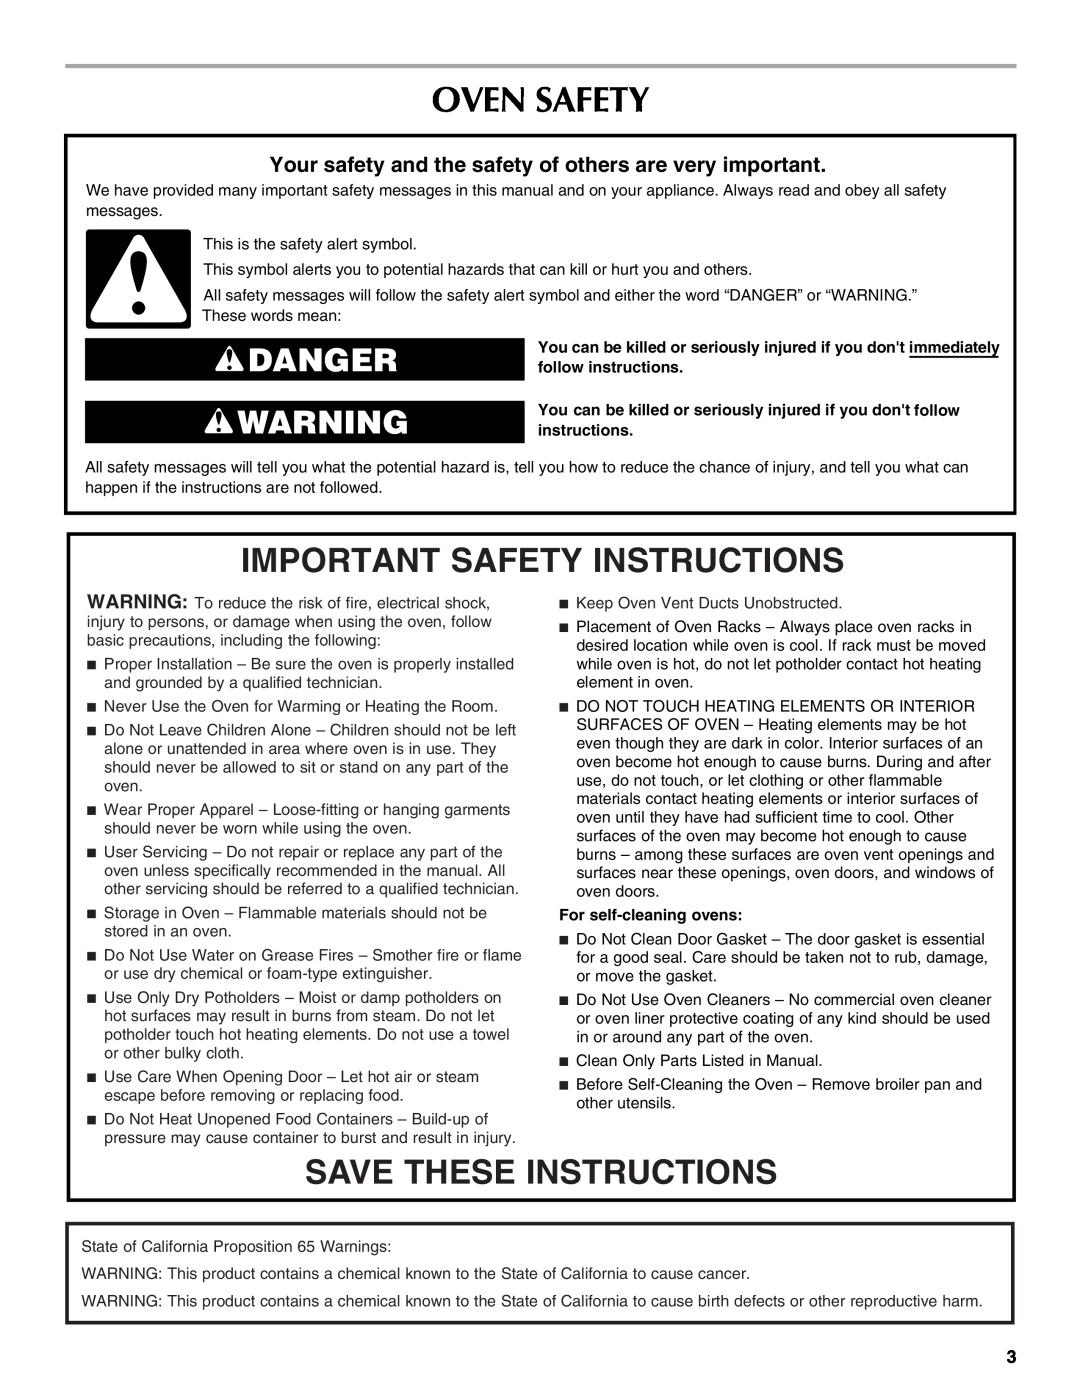 Maytag MMW7530WDS Oven Safety, Important Safety Instructions, Save These Instructions, Danger, For self-cleaning ovens 